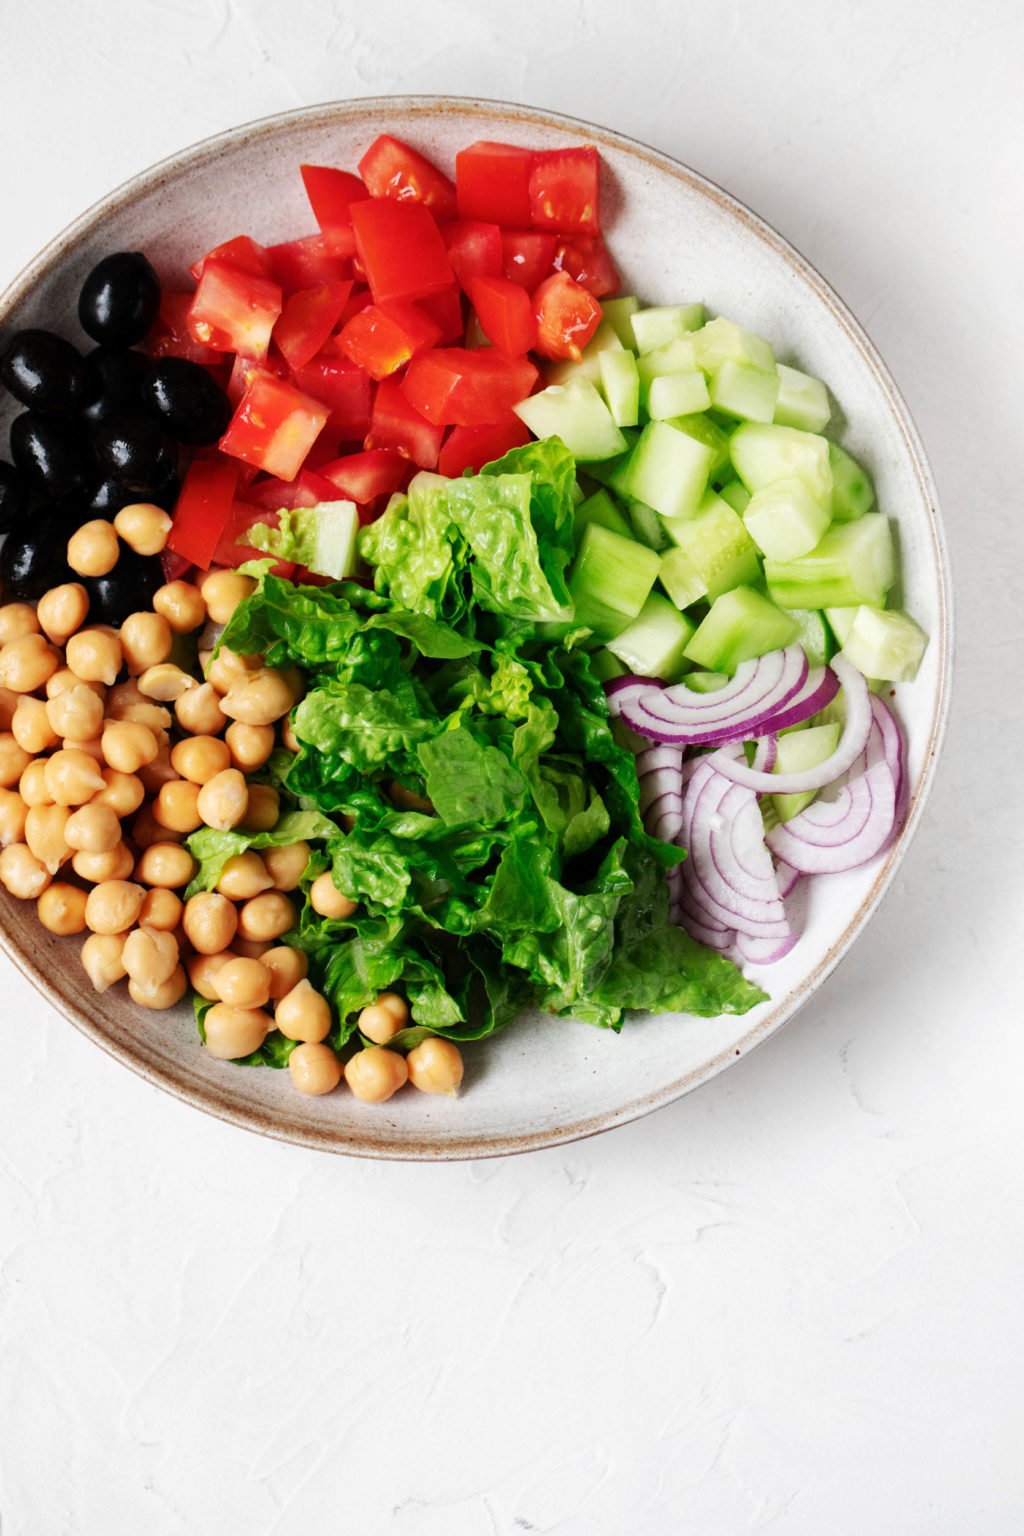 A large, white serving bowl is filled with the ingredients for a chickpea salad. It rests on a white surface.